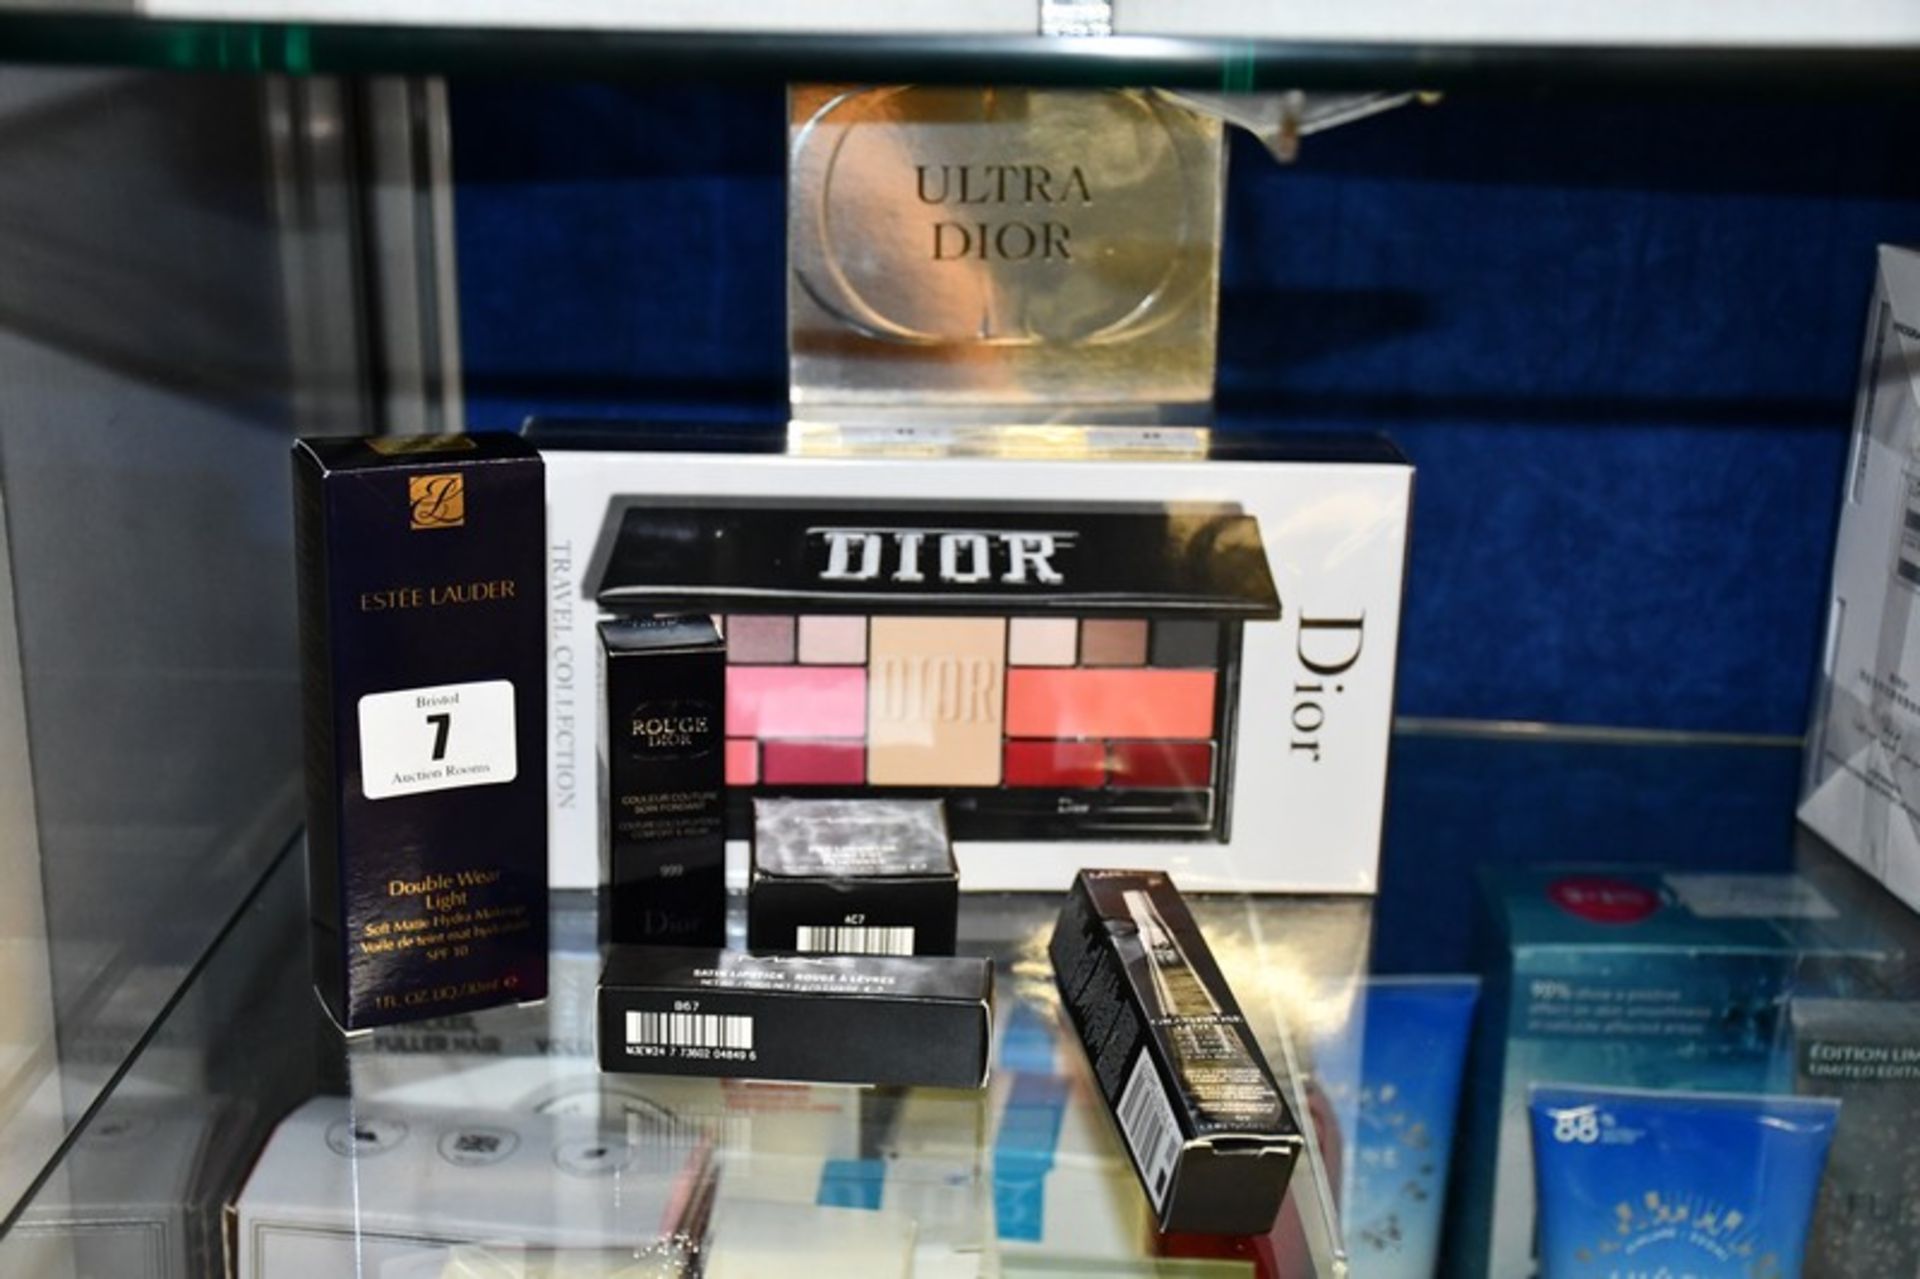 Two Dior Ultra Dior couture palettes together with five other cosmetic items to include Mac, Lancome